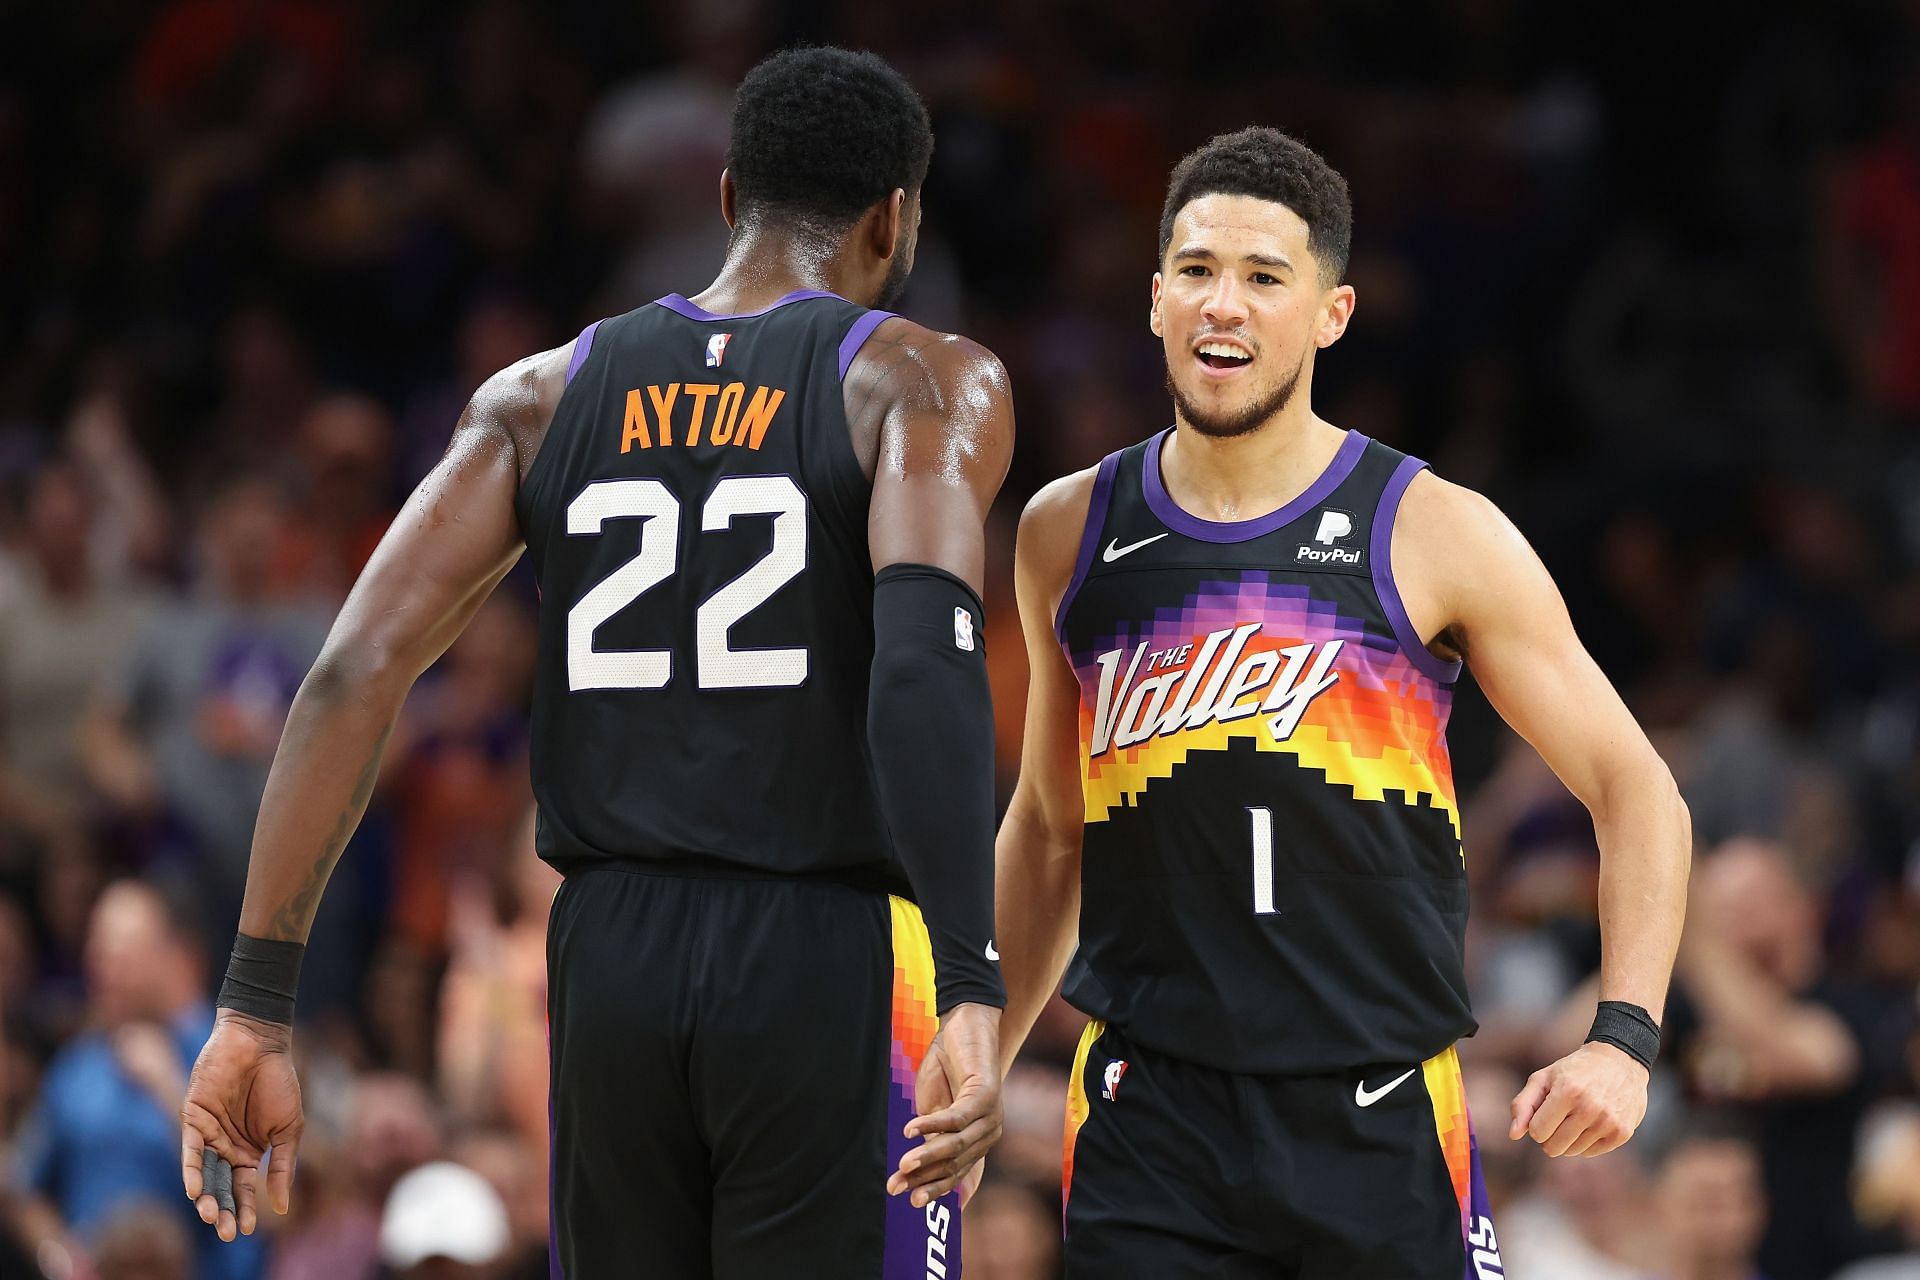 Devin Booker of the Suns celebrates with Deandre Ayton in Game 1.